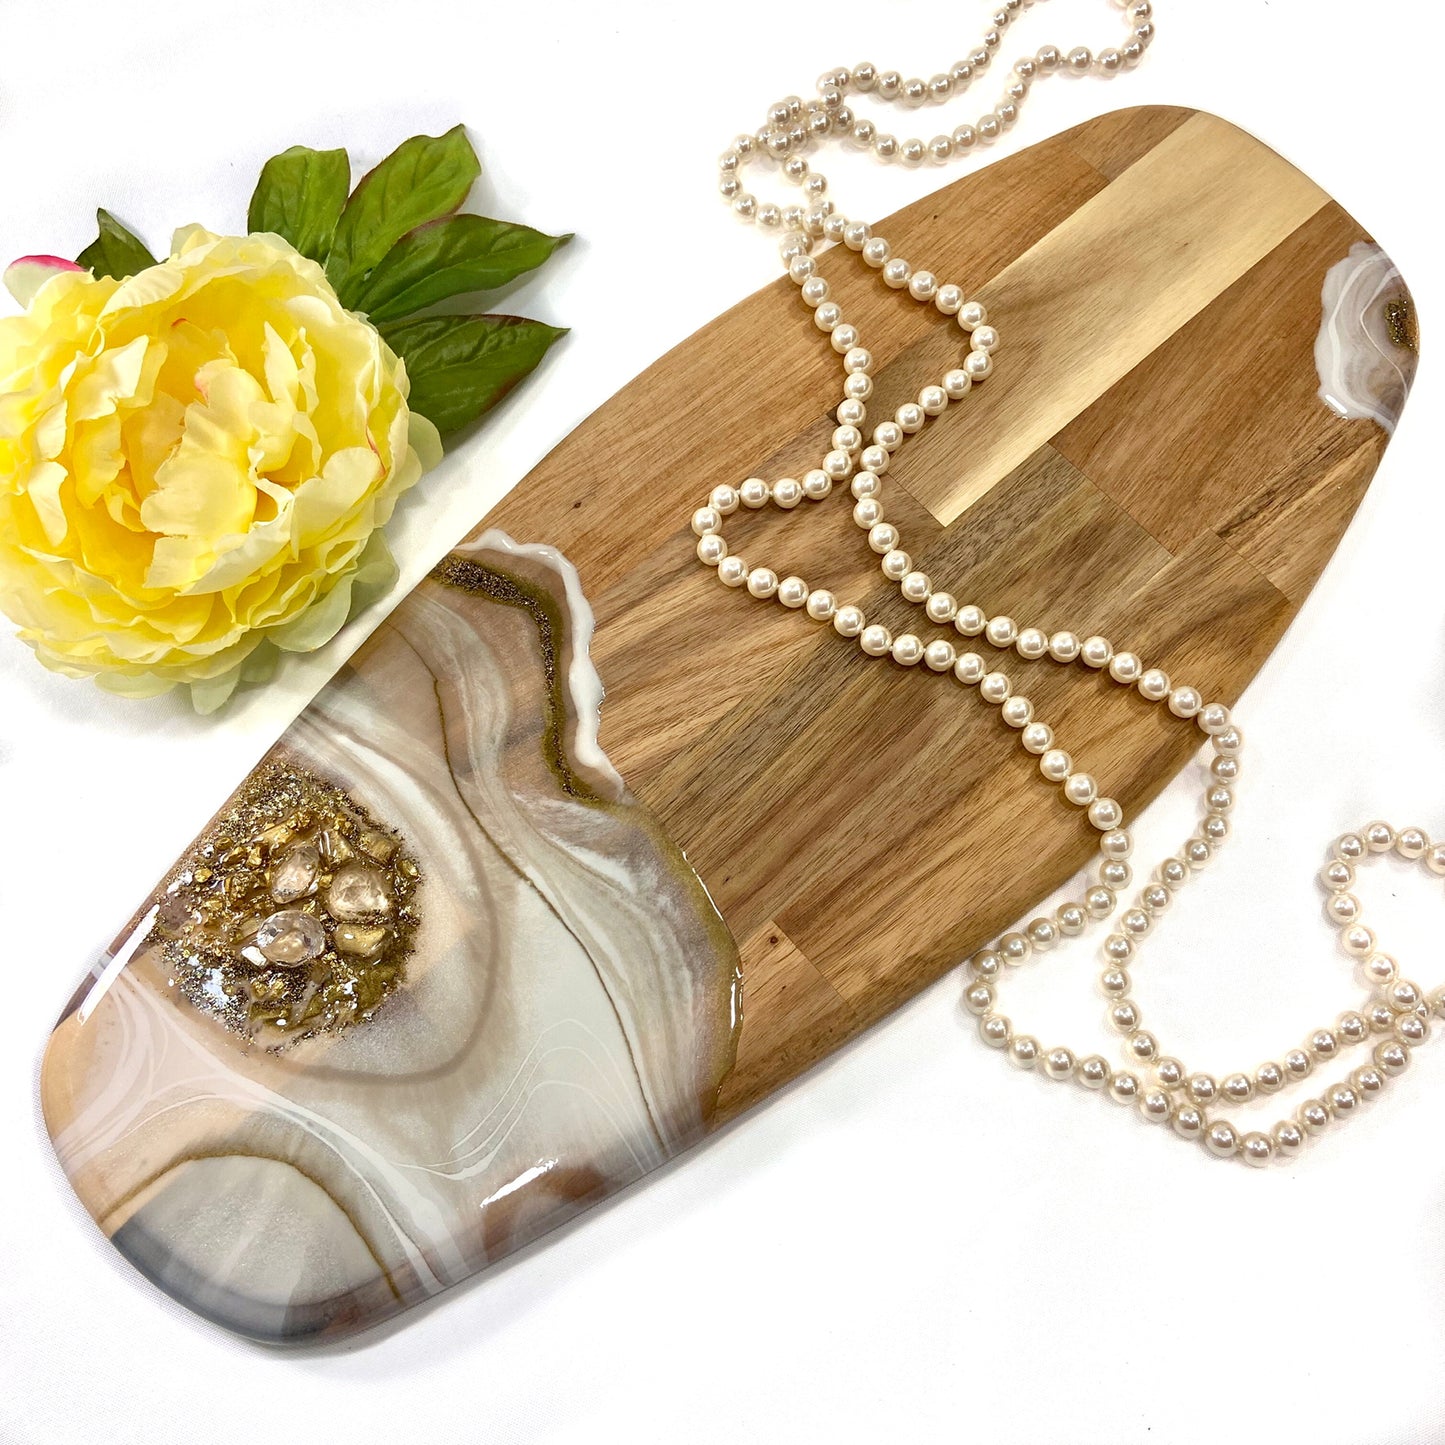 Marble Serving Board